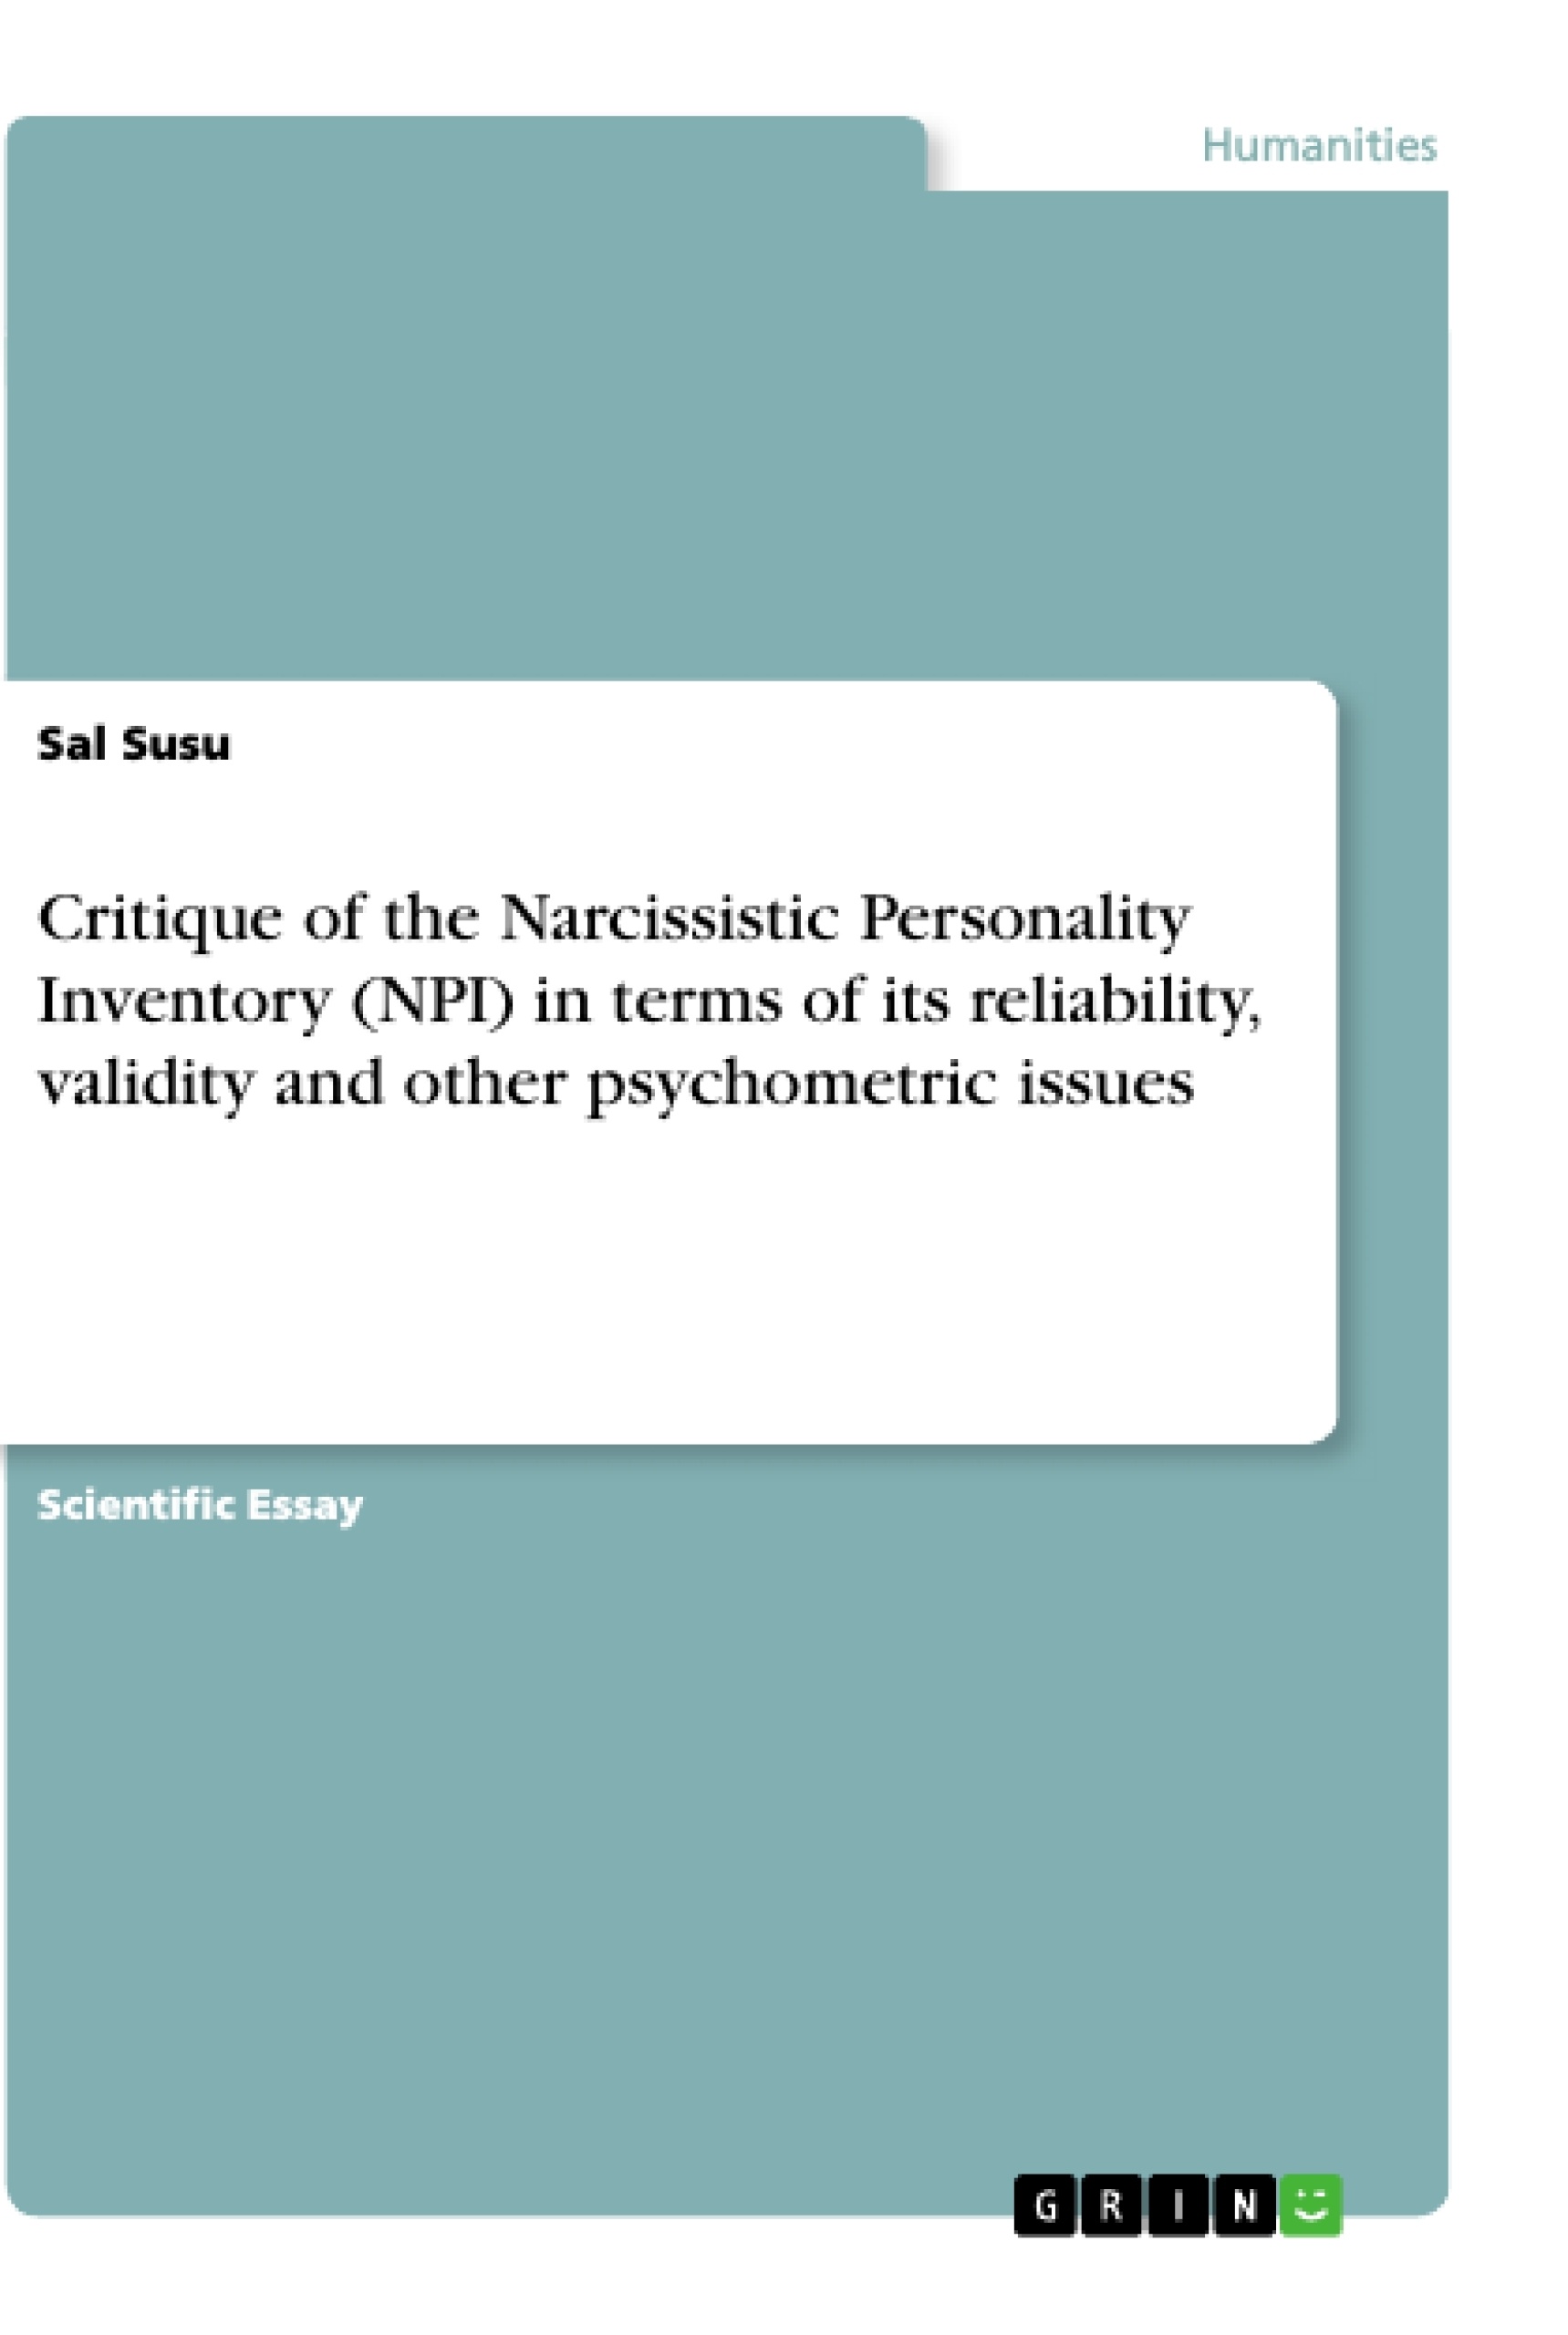 Title: Critique of the Narcissistic Personality Inventory (NPI) in terms of its reliability, validity and other psychometric issues